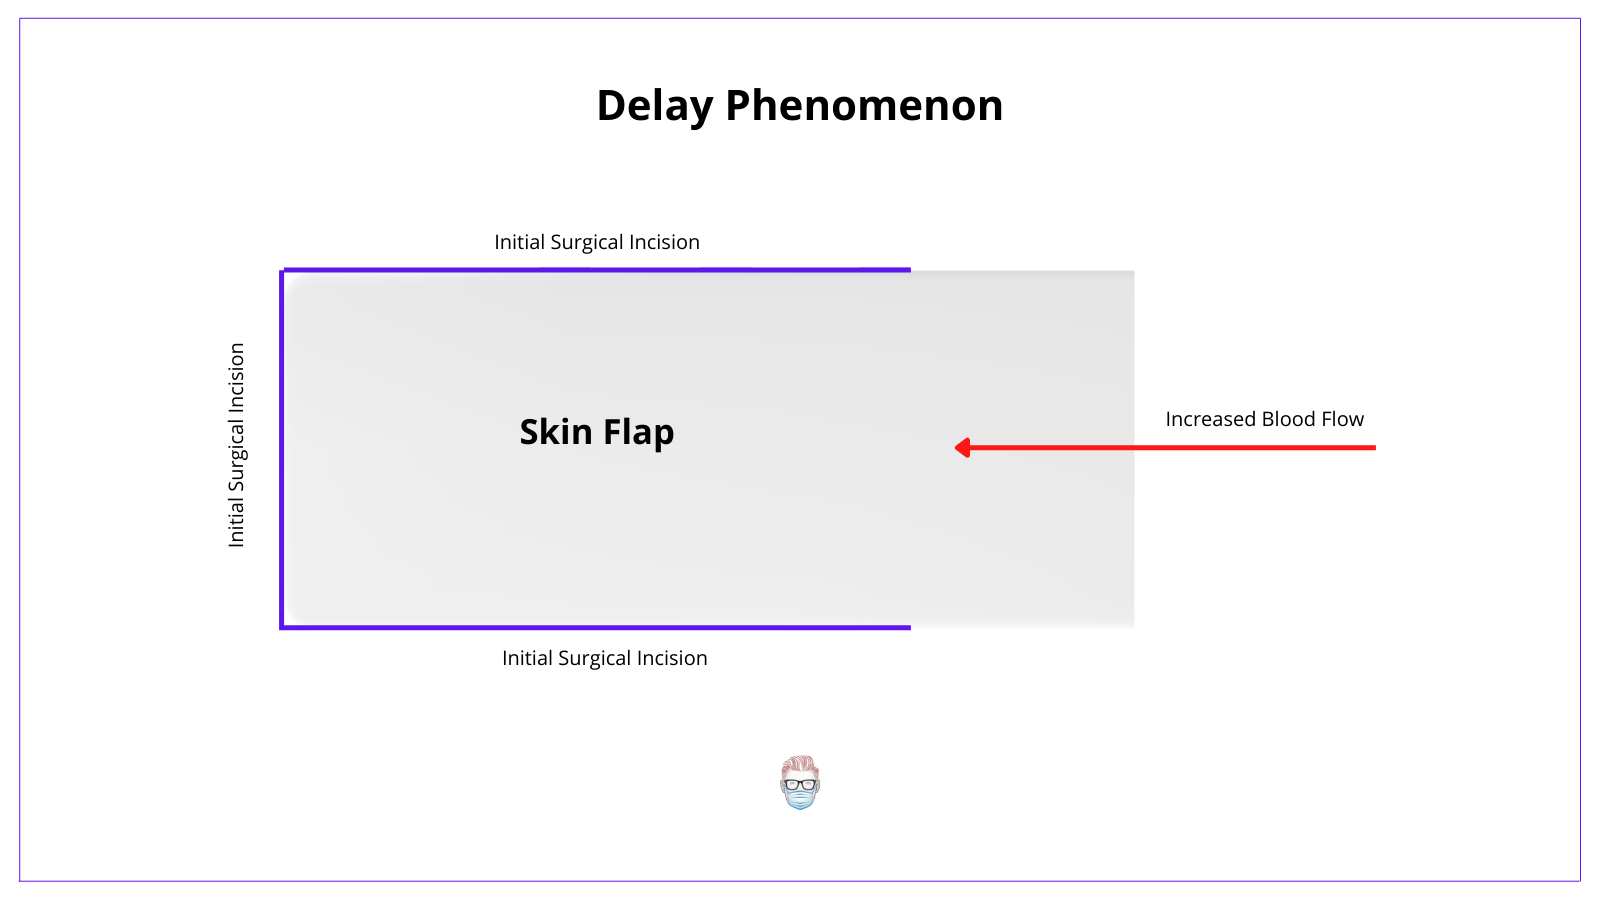 The delay phenomenon in flap surgery increases the blood flow by isolating the skin flap on it's planned blood supply. 